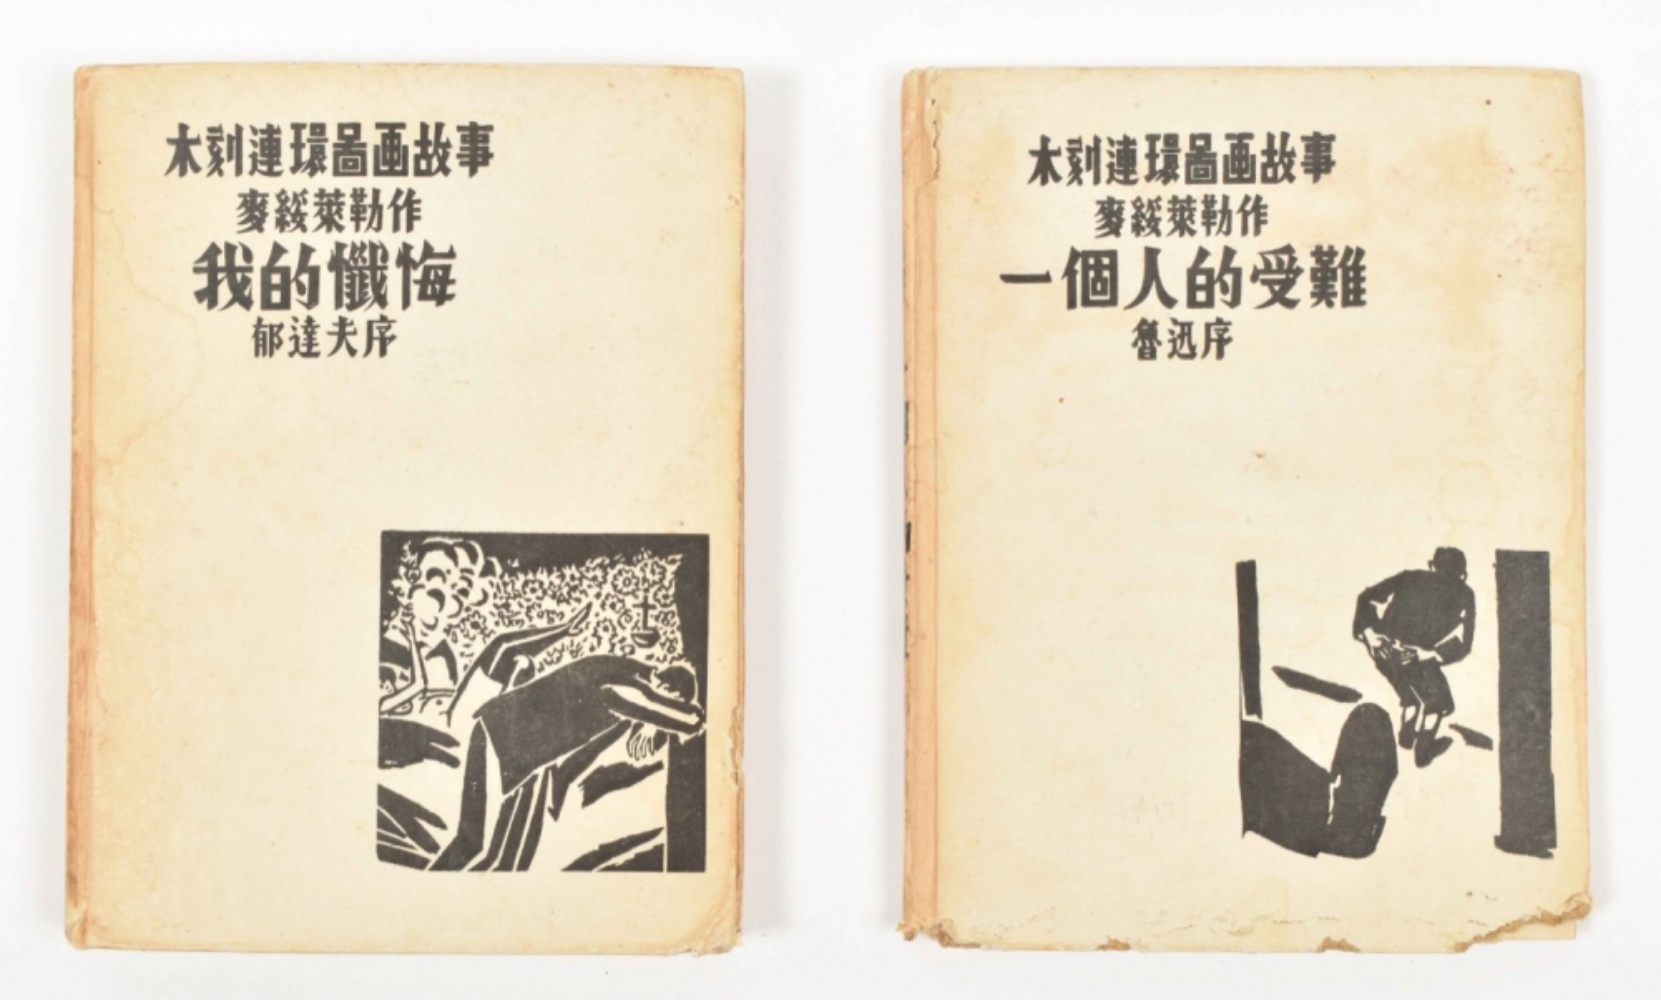 Two extremely rare Chinese pirated editions